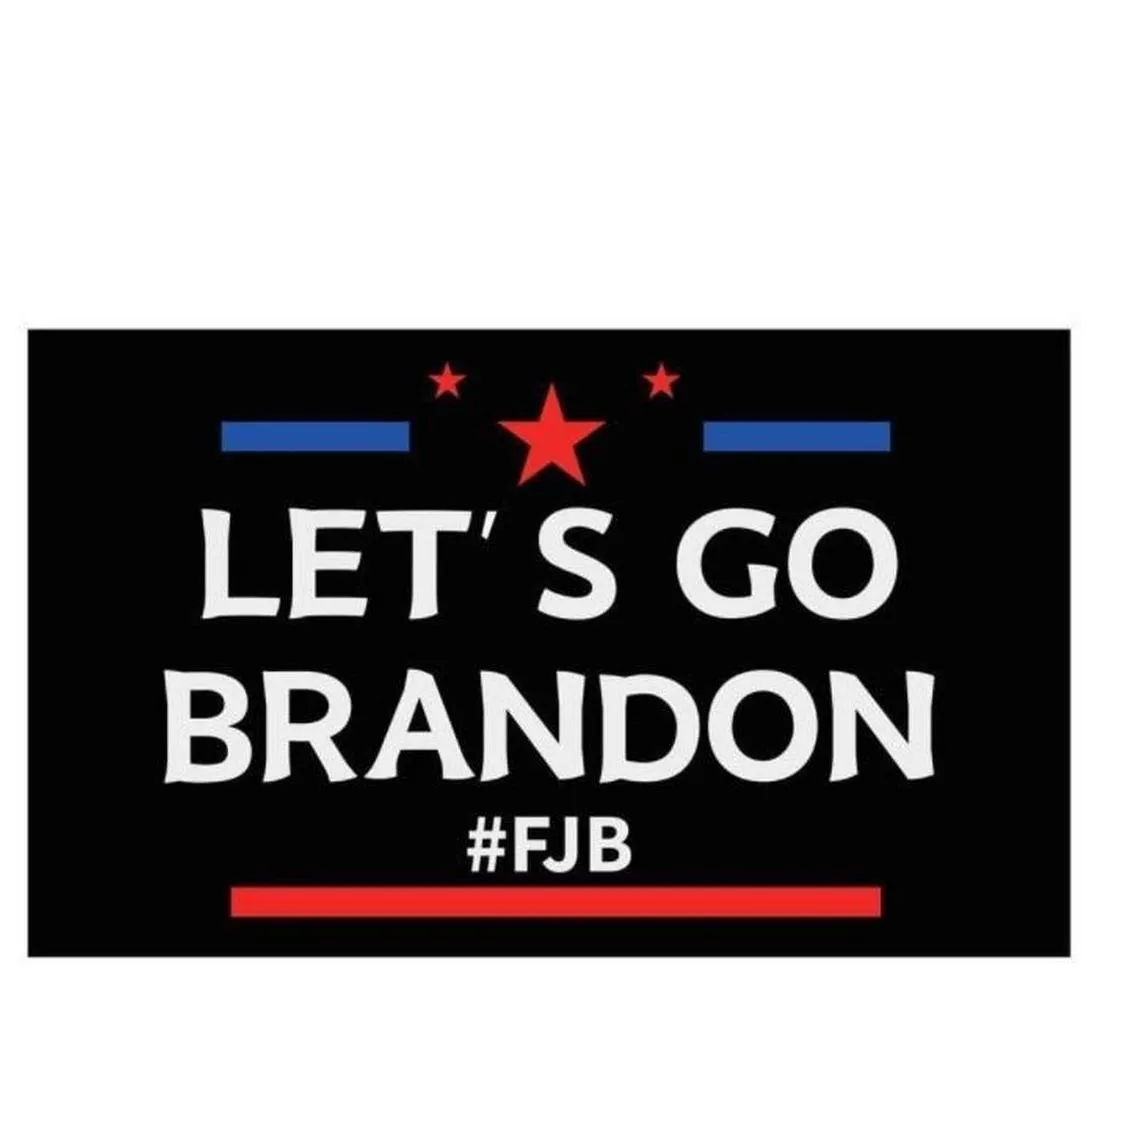 new lets go brandon trump election flag double sided presidential flag 150x90cm wholesale in stock xu03